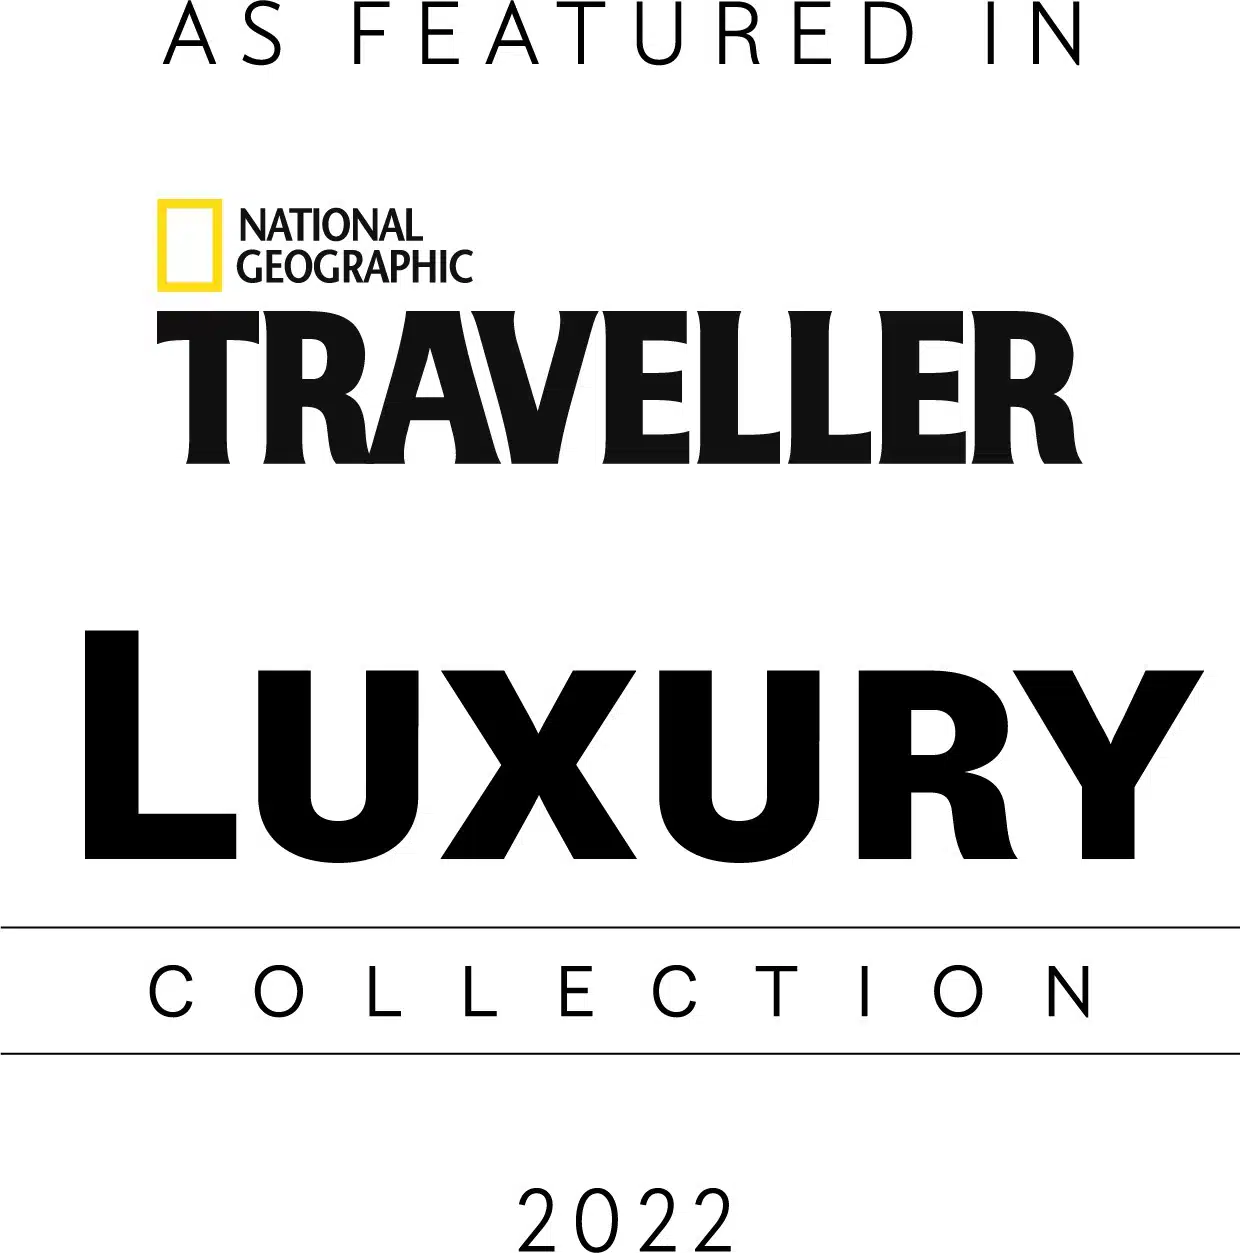 Hotel Rental Villa Featured in National Geographic Traveller Luxury Collection 2022